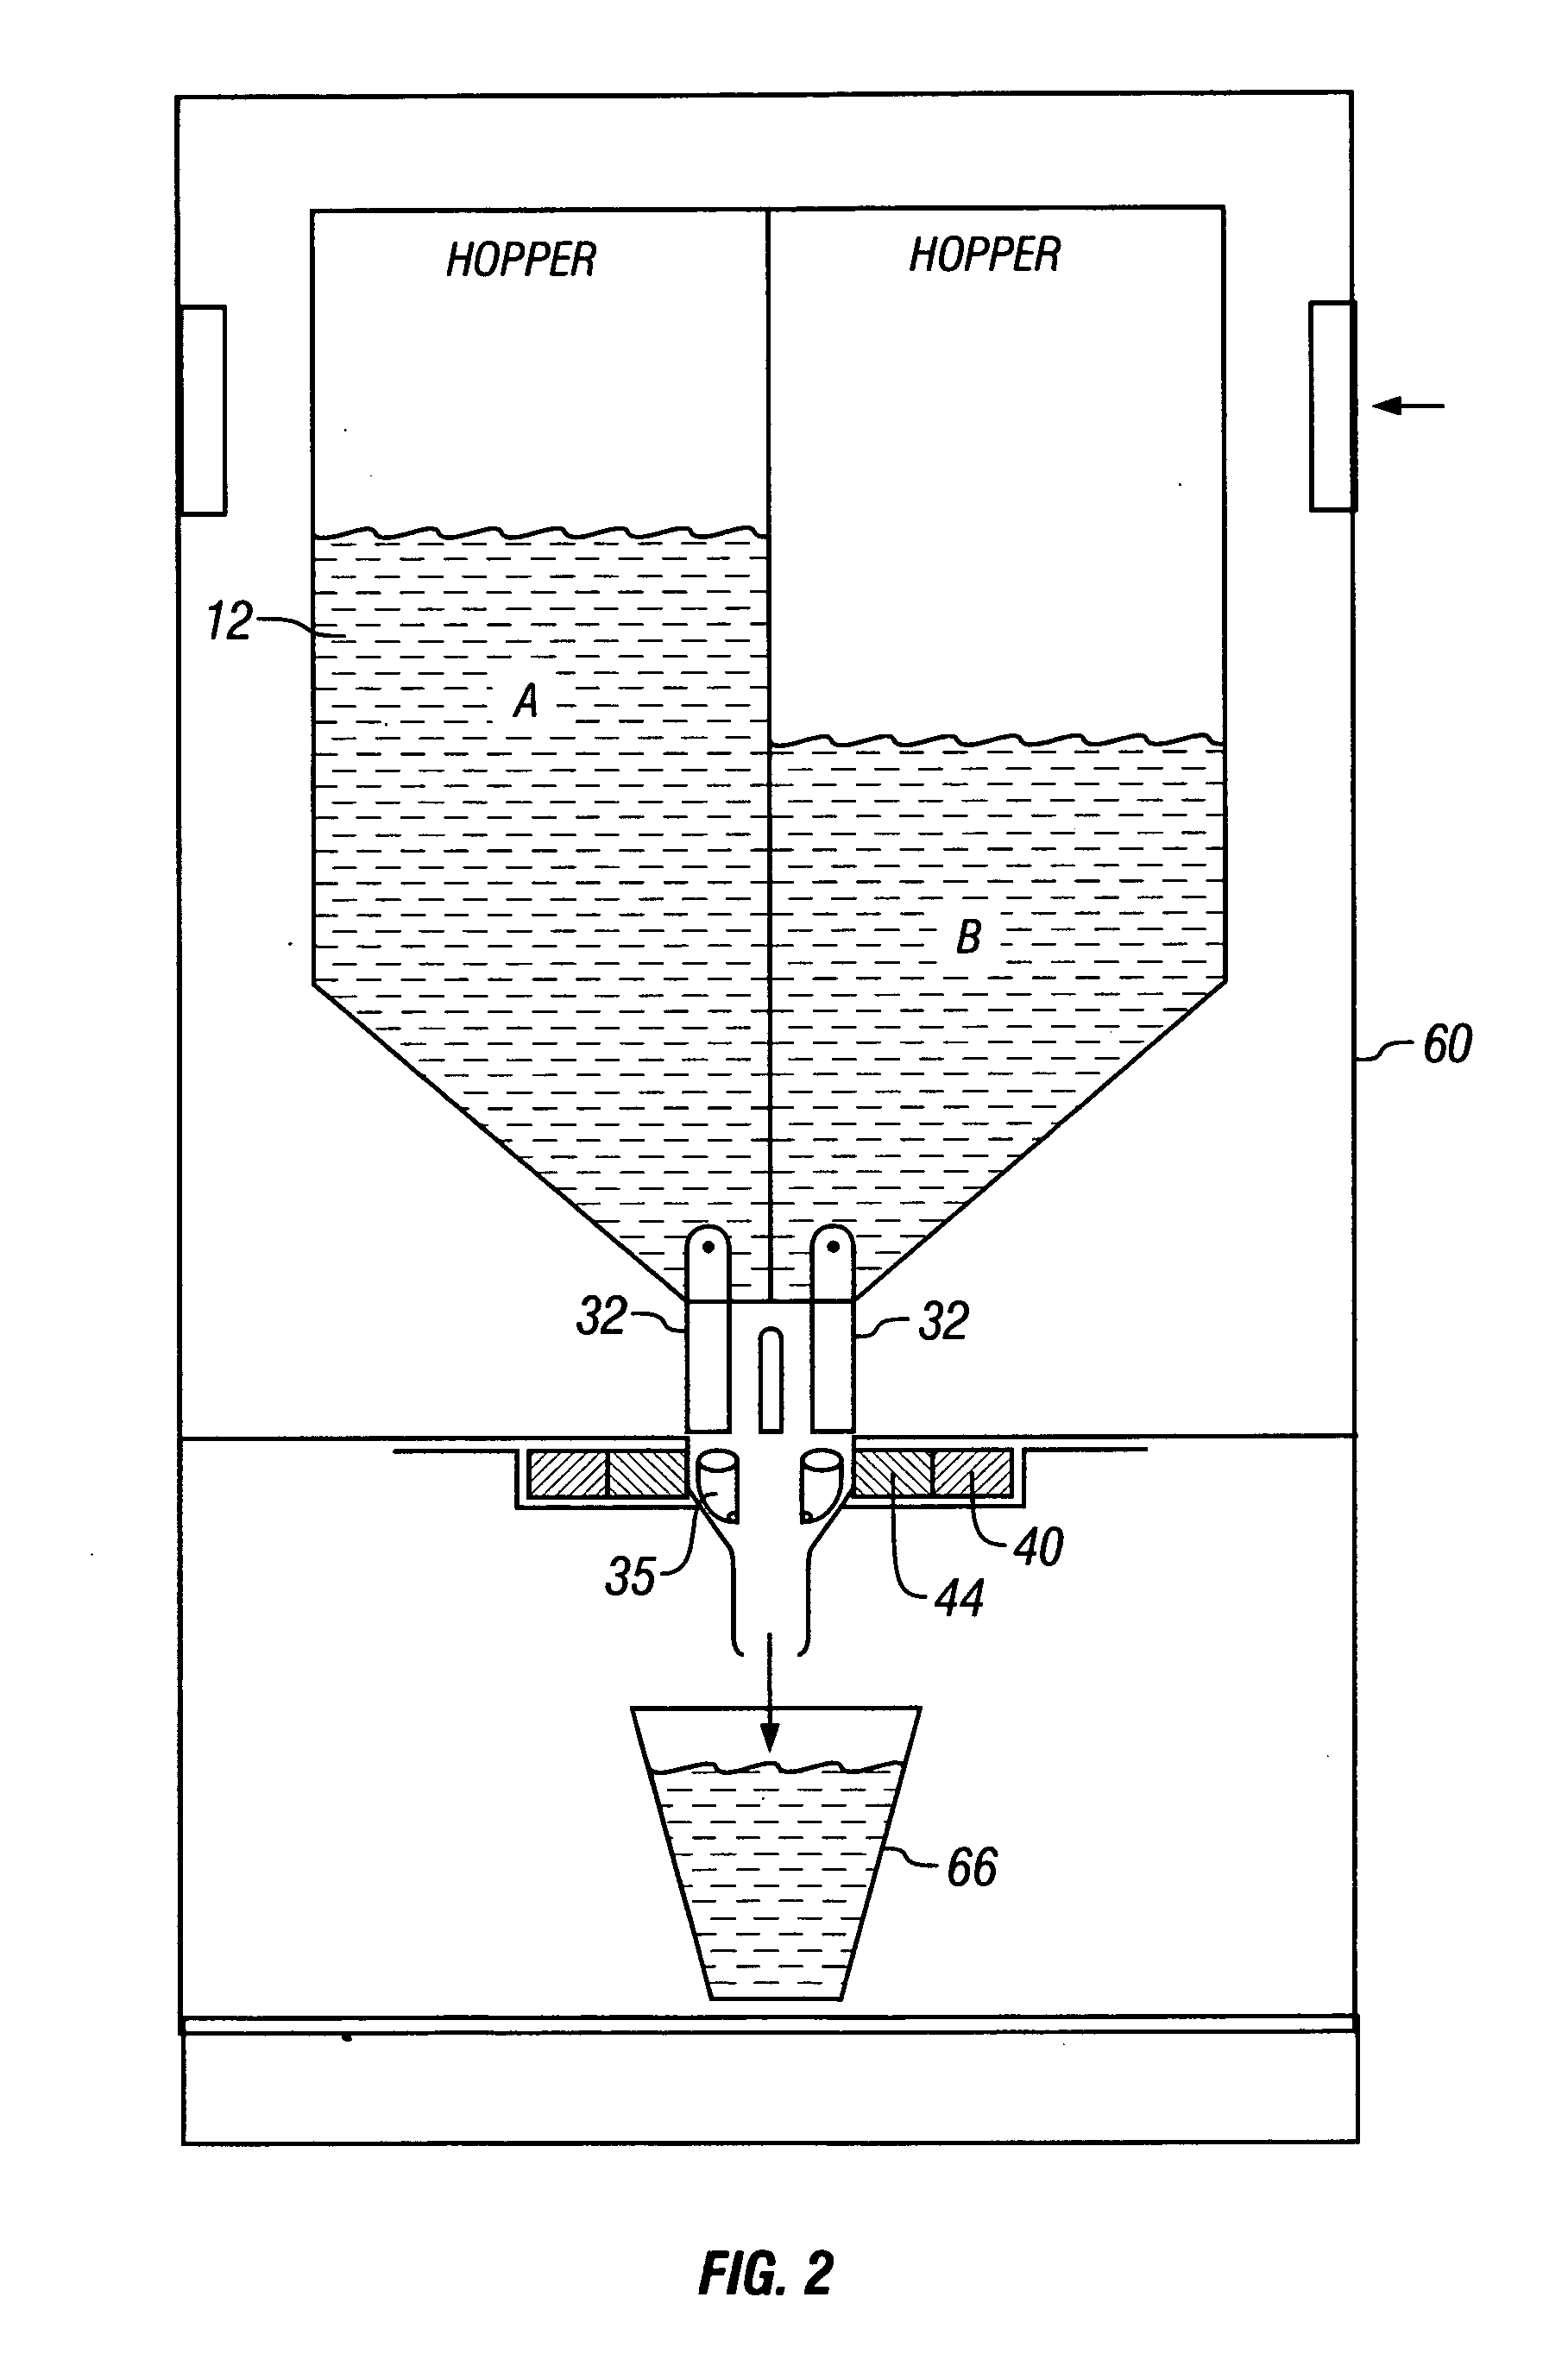 Method and apparatus for mixing beverage ingredient powder in a drink dispenser